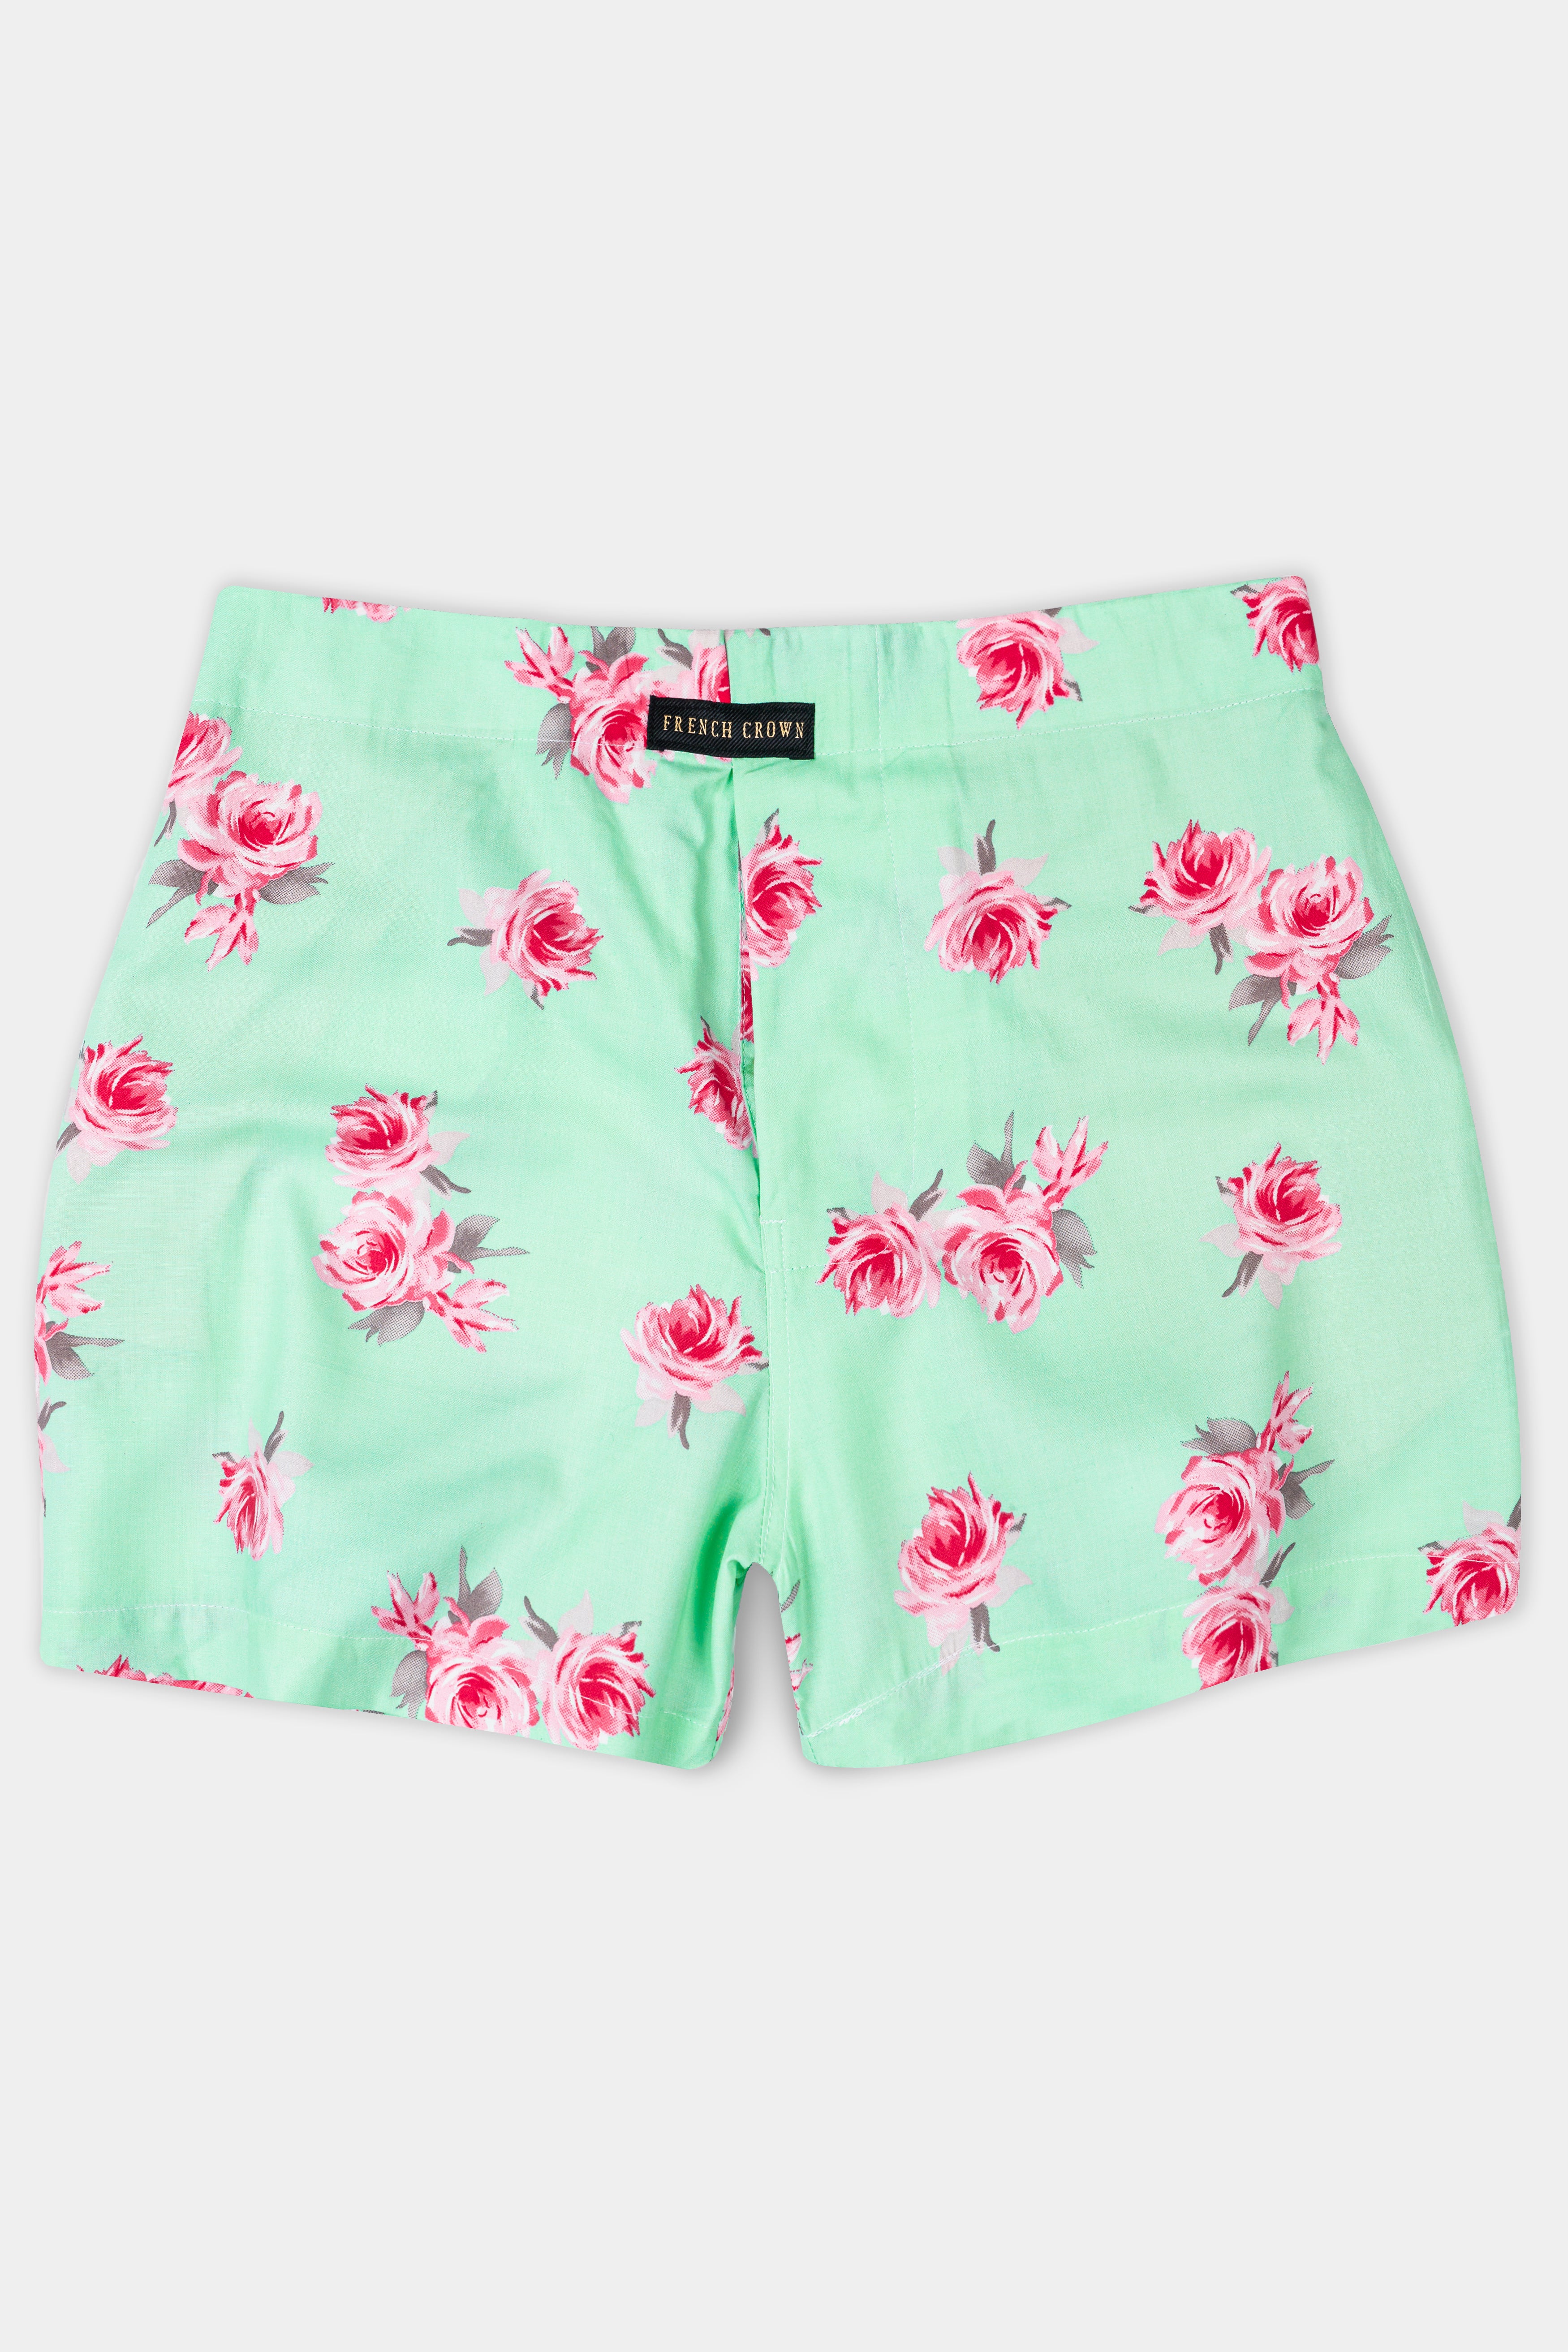 Desert Brown Printed and Turquoise Green with Mandy Pink Floral Printed Premium Cotton Boxers BX559-BX560-28, BX559-BX560-30, BX559-BX560-32, BX559-BX560-34, BX559-BX560-36, BX559-BX560-38, BX559-BX560-40, BX559-BX560-42, BX559-BX560-44